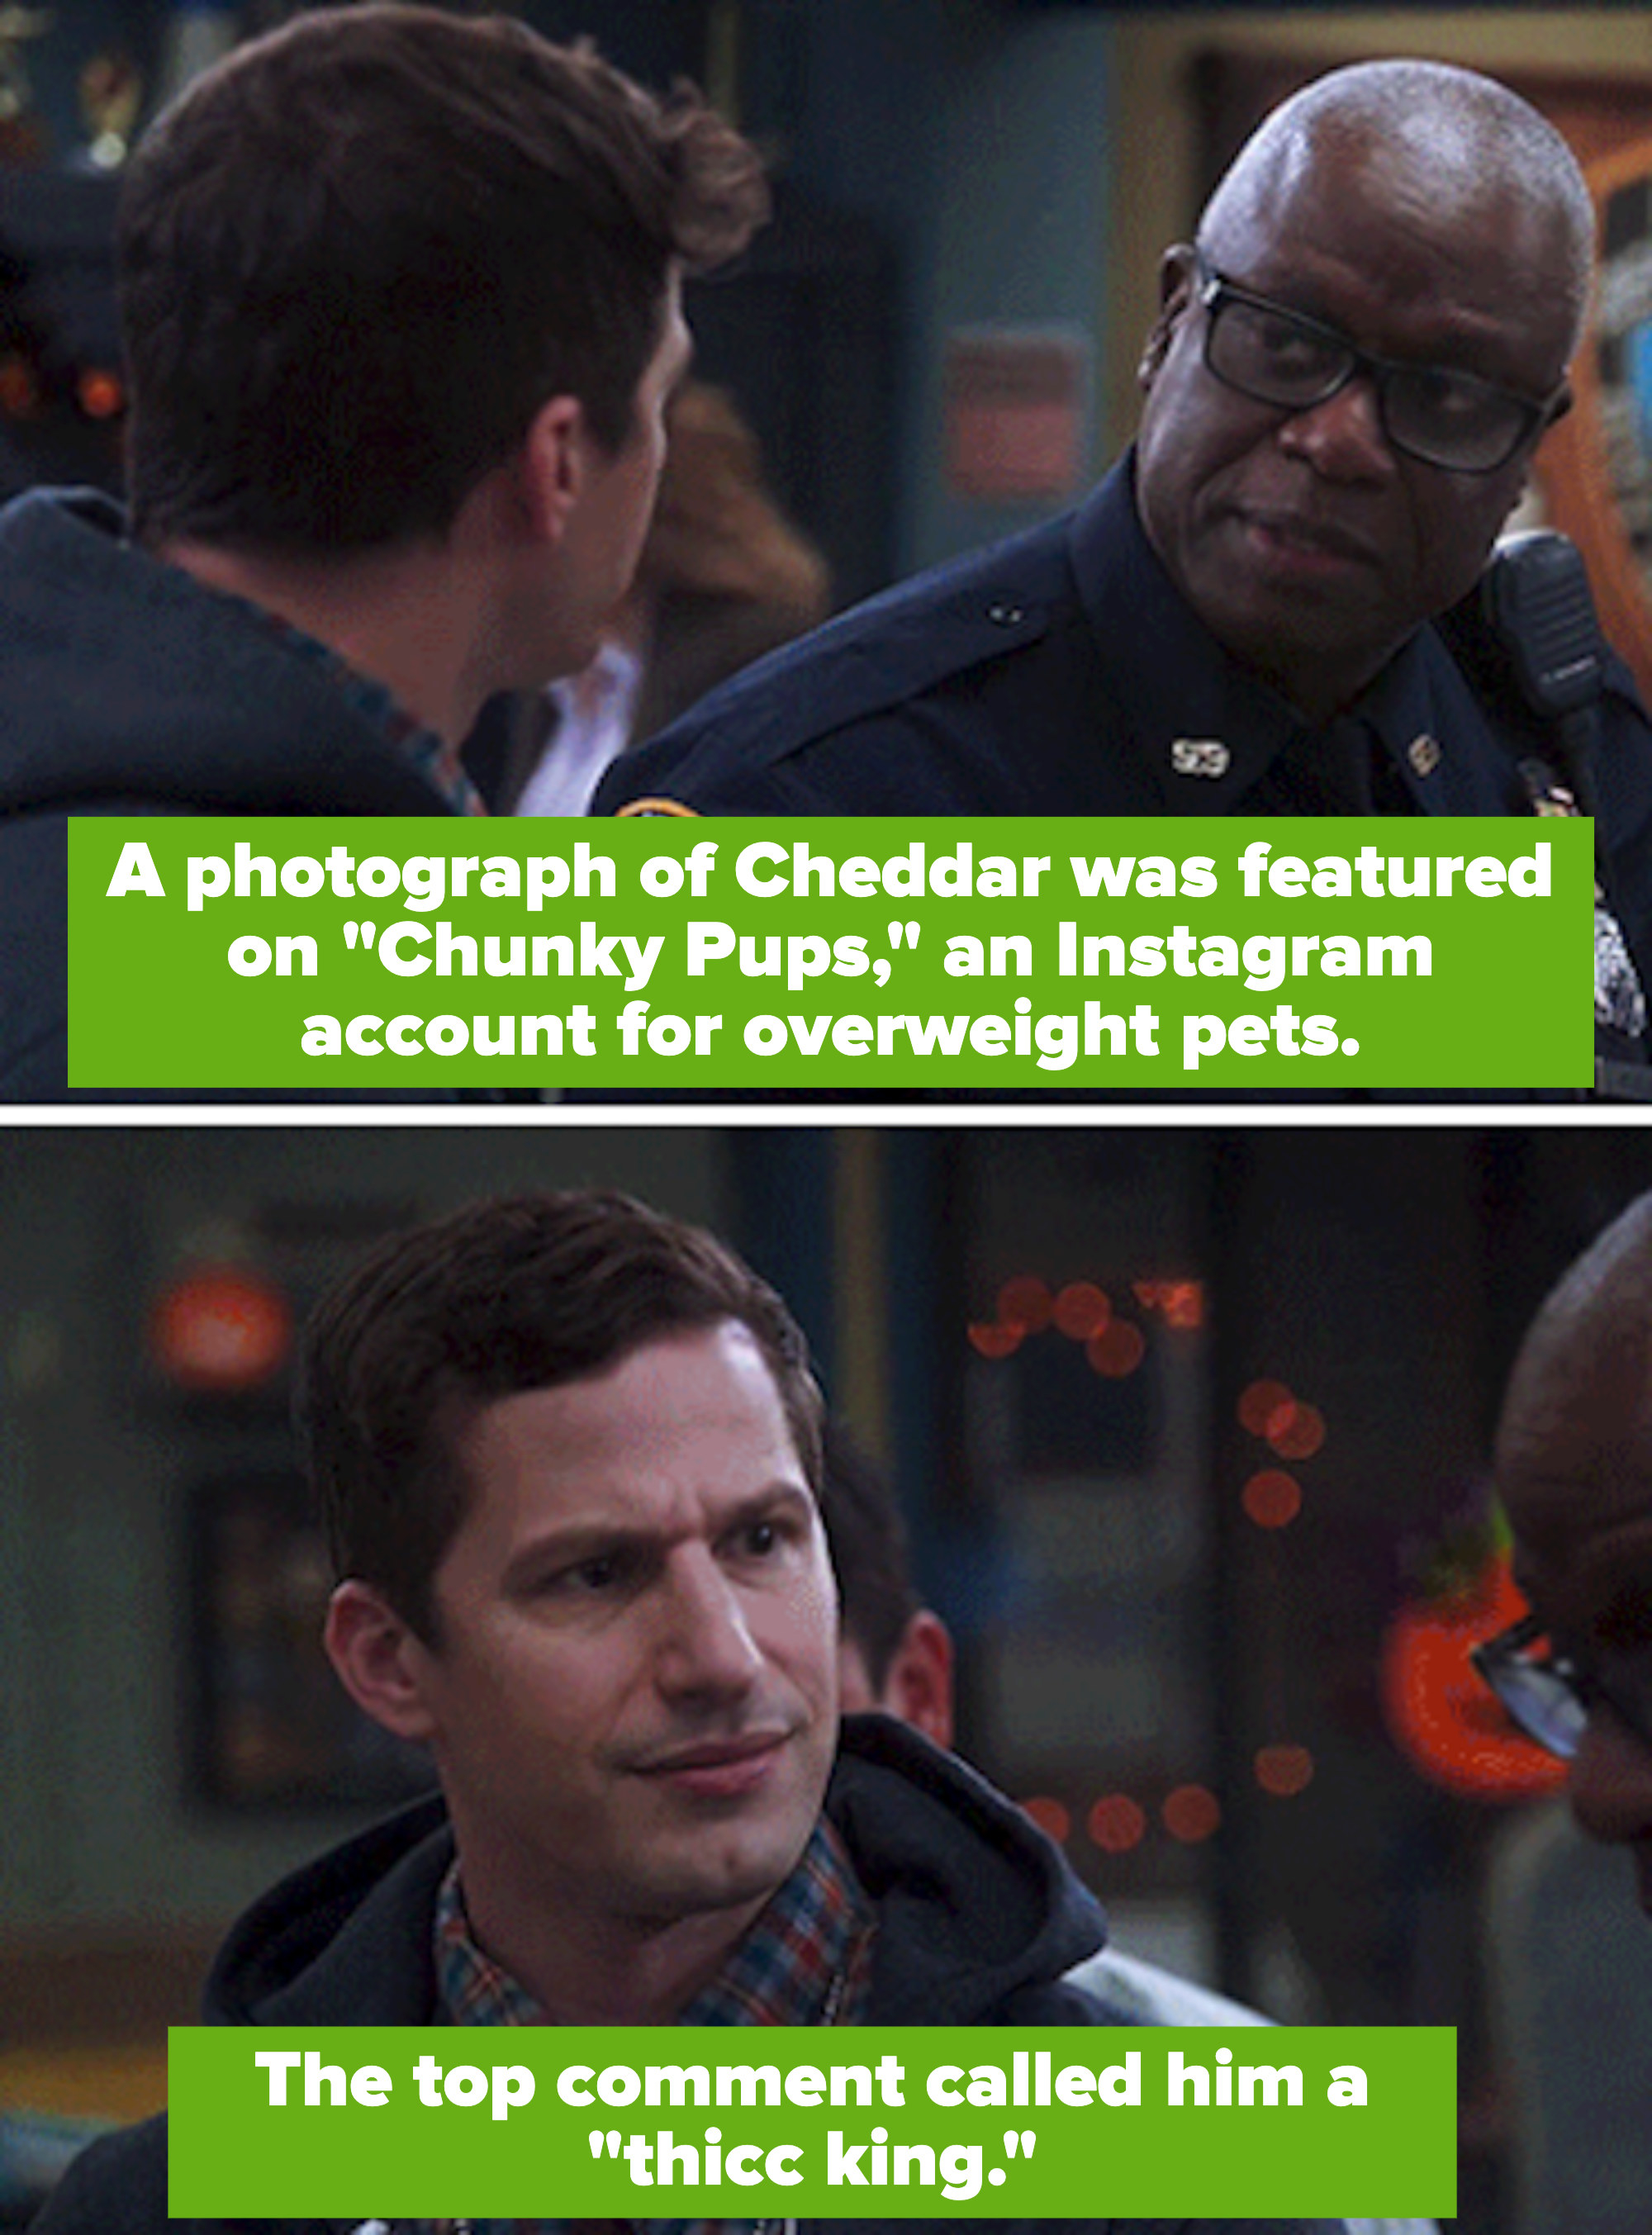 Holt to Jake: &quot;A photograph of Cheddar was featured on &#x27;Chunky Pups&#x27; an Instagram account for overweight pets. The top comment called him a &#x27;thicc king&#x27;&quot;